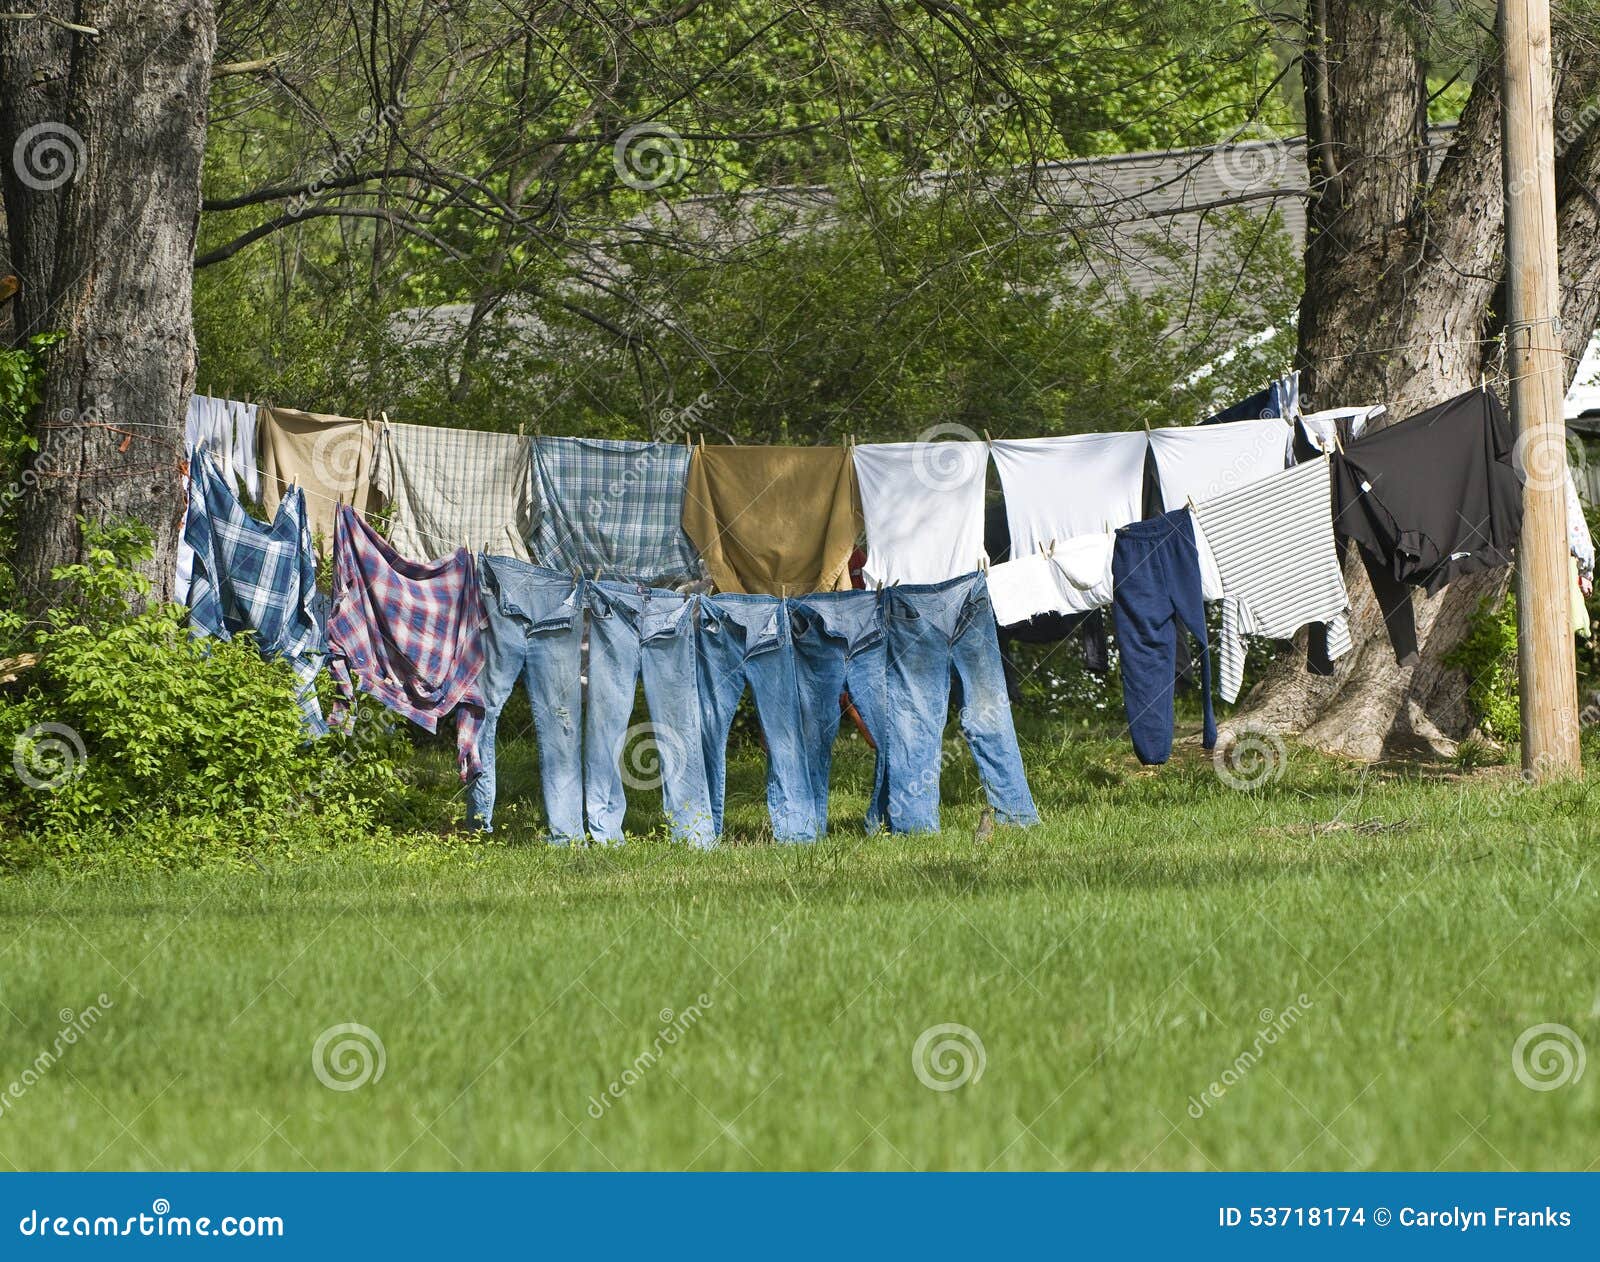 Clothes Drying Outdoors on Clothes Line Stock Photo - Image of